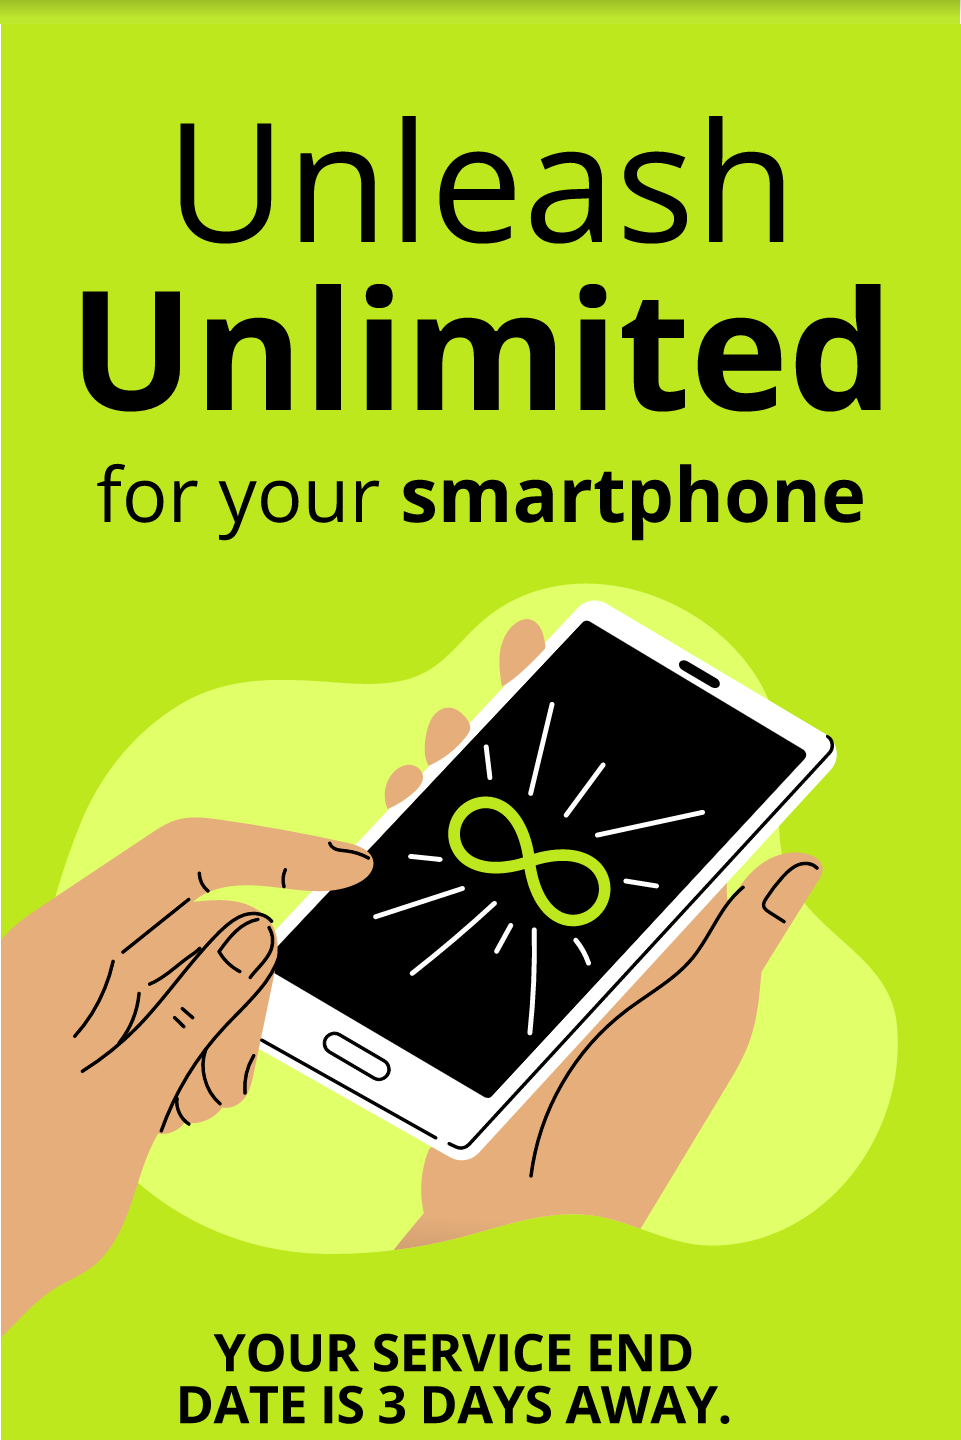 Unleash Unlimited for your smartphone